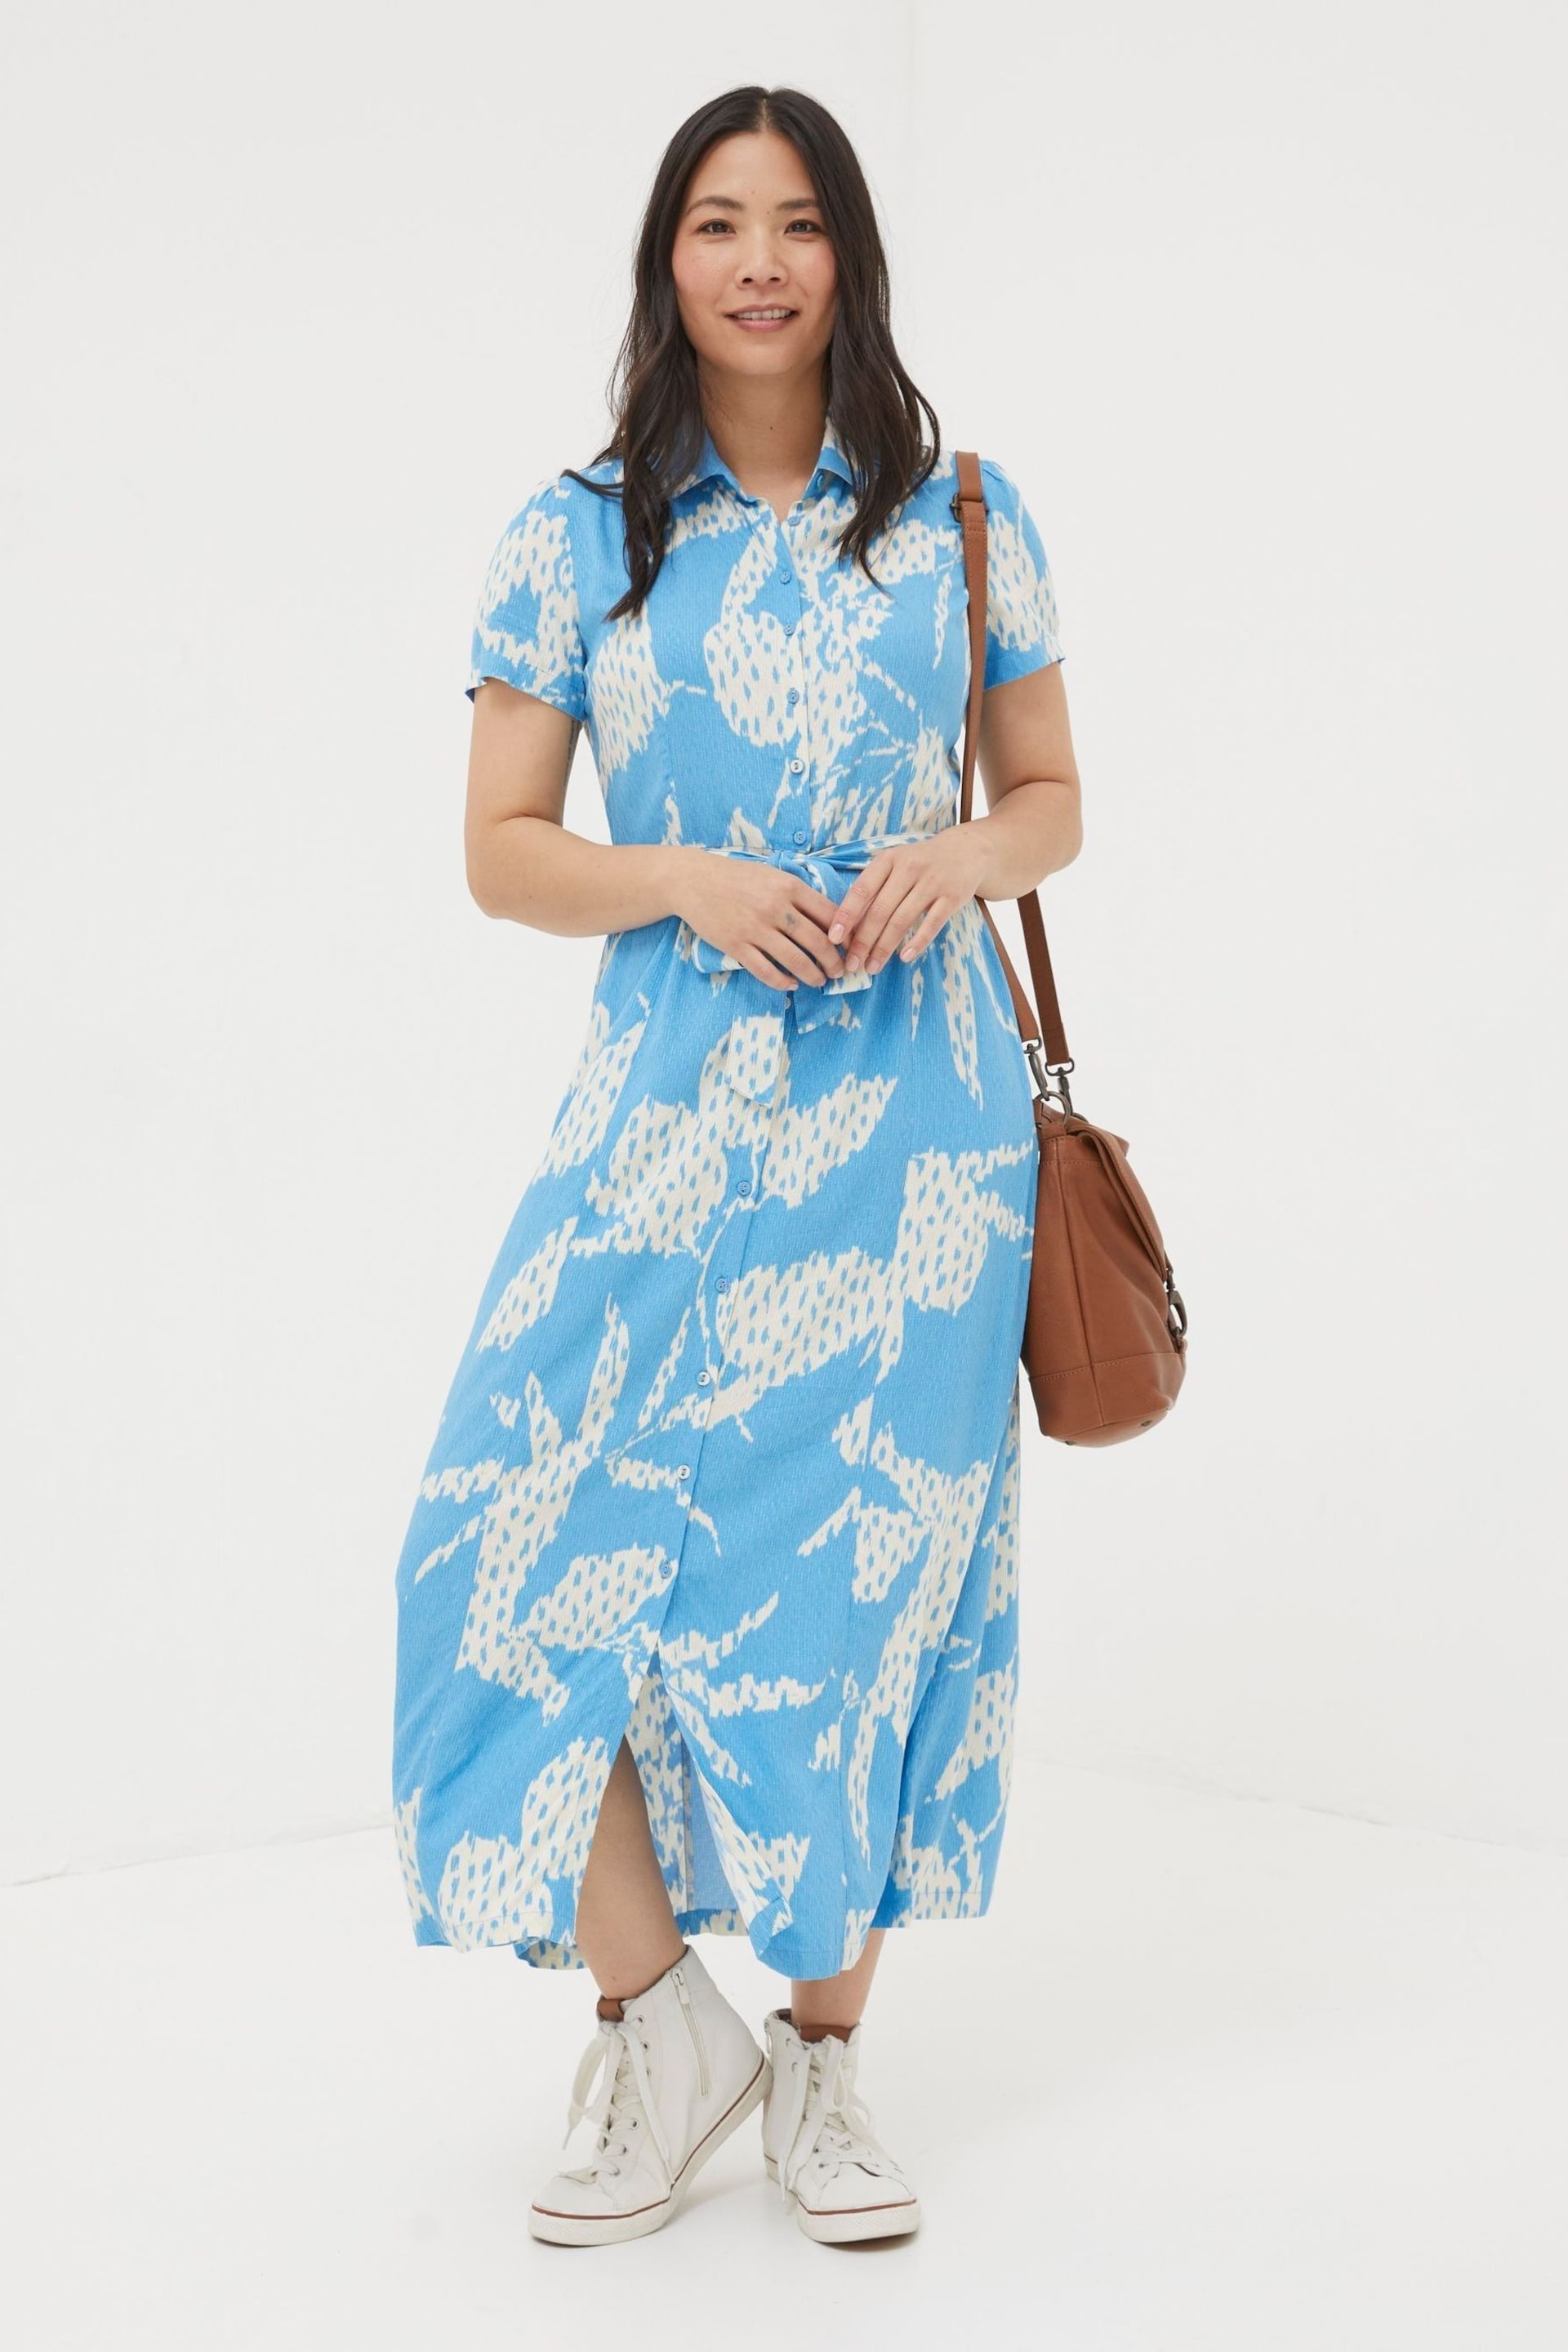 FatFace Blue Aster Textured Leaves Midi Dress - Image 2 of 7